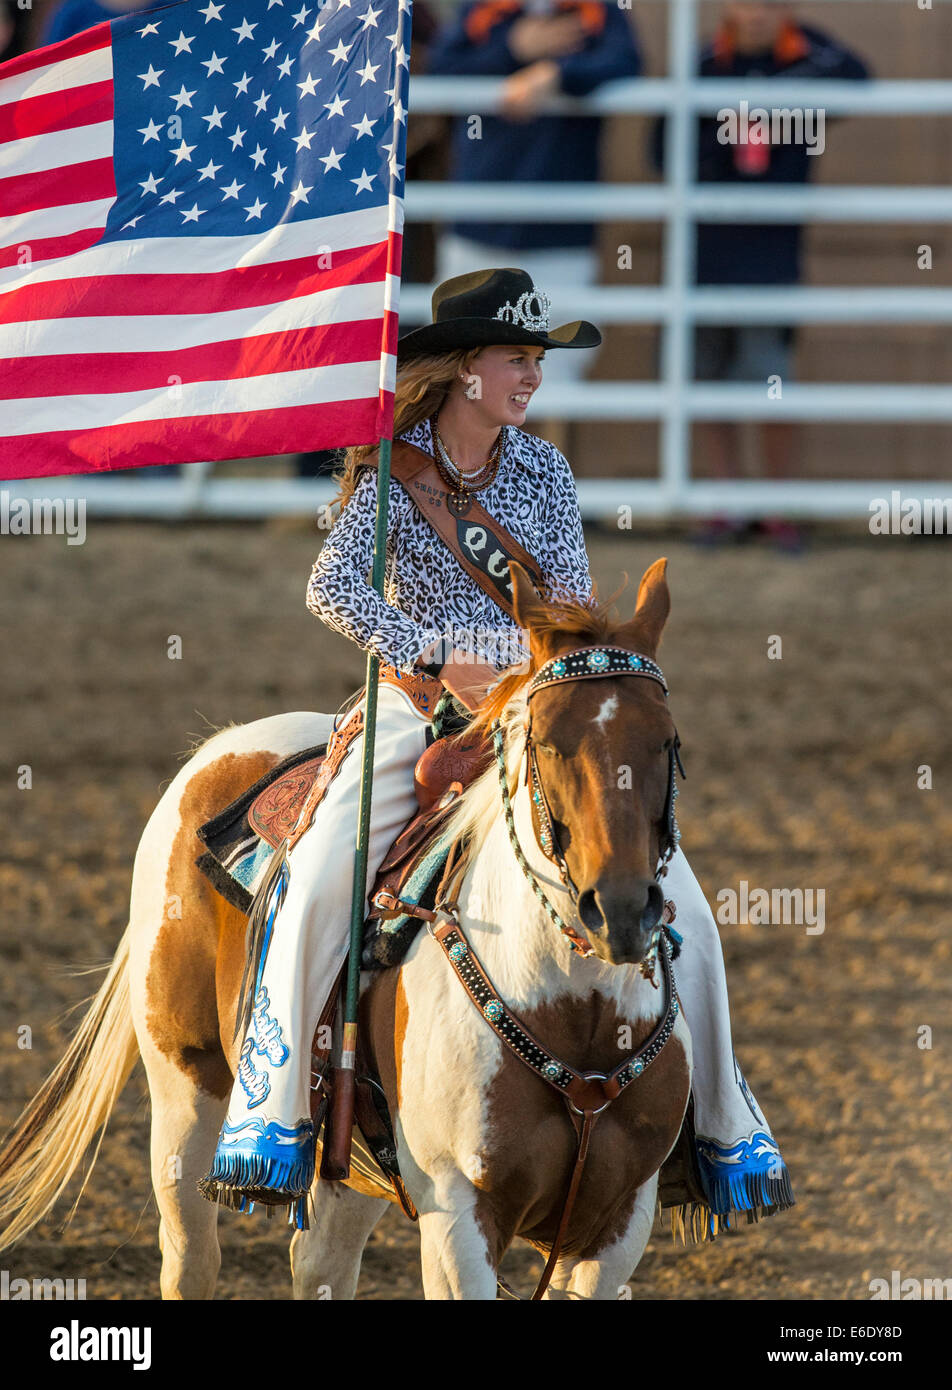 Rodeo Queen carrying American Flag on horseback during National Anthem, Chaffee County Fair & Rodeo, Colorado, USA Stock Photo